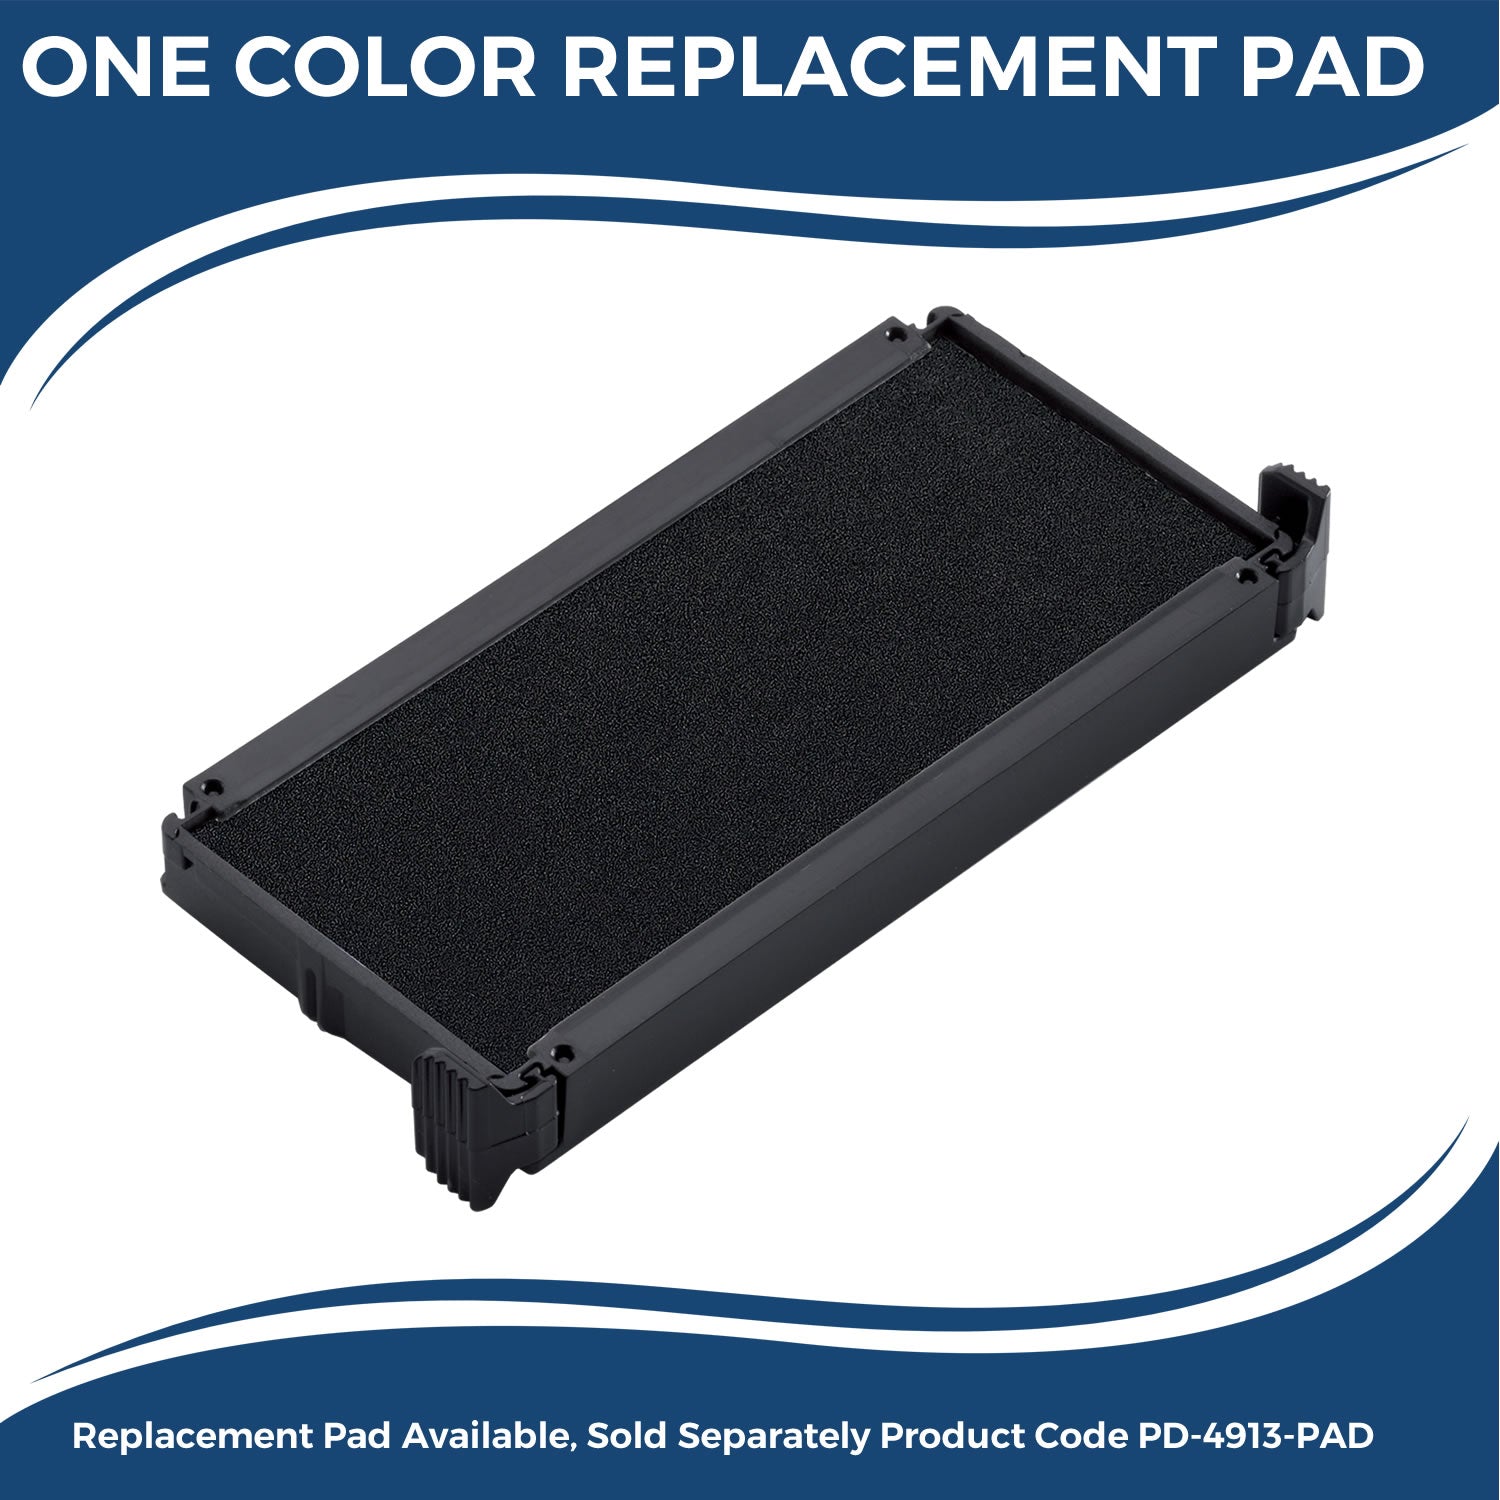 Large Self-Inking First Class Mail International Stamp 4974S Large Replacment Pad